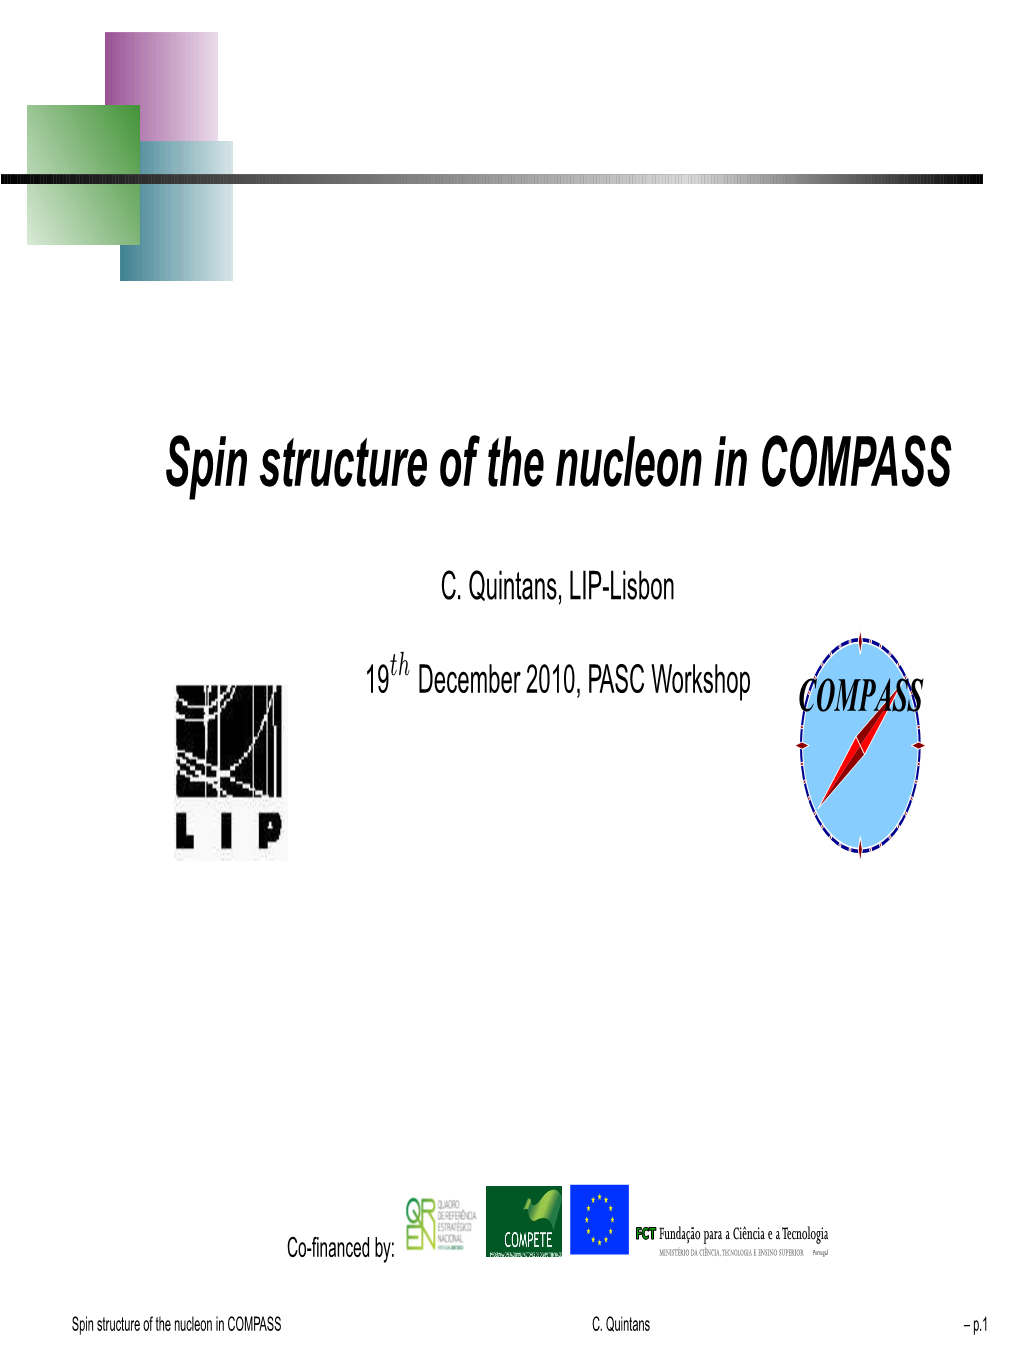 Spin Structure of the Nucleon in COMPASS